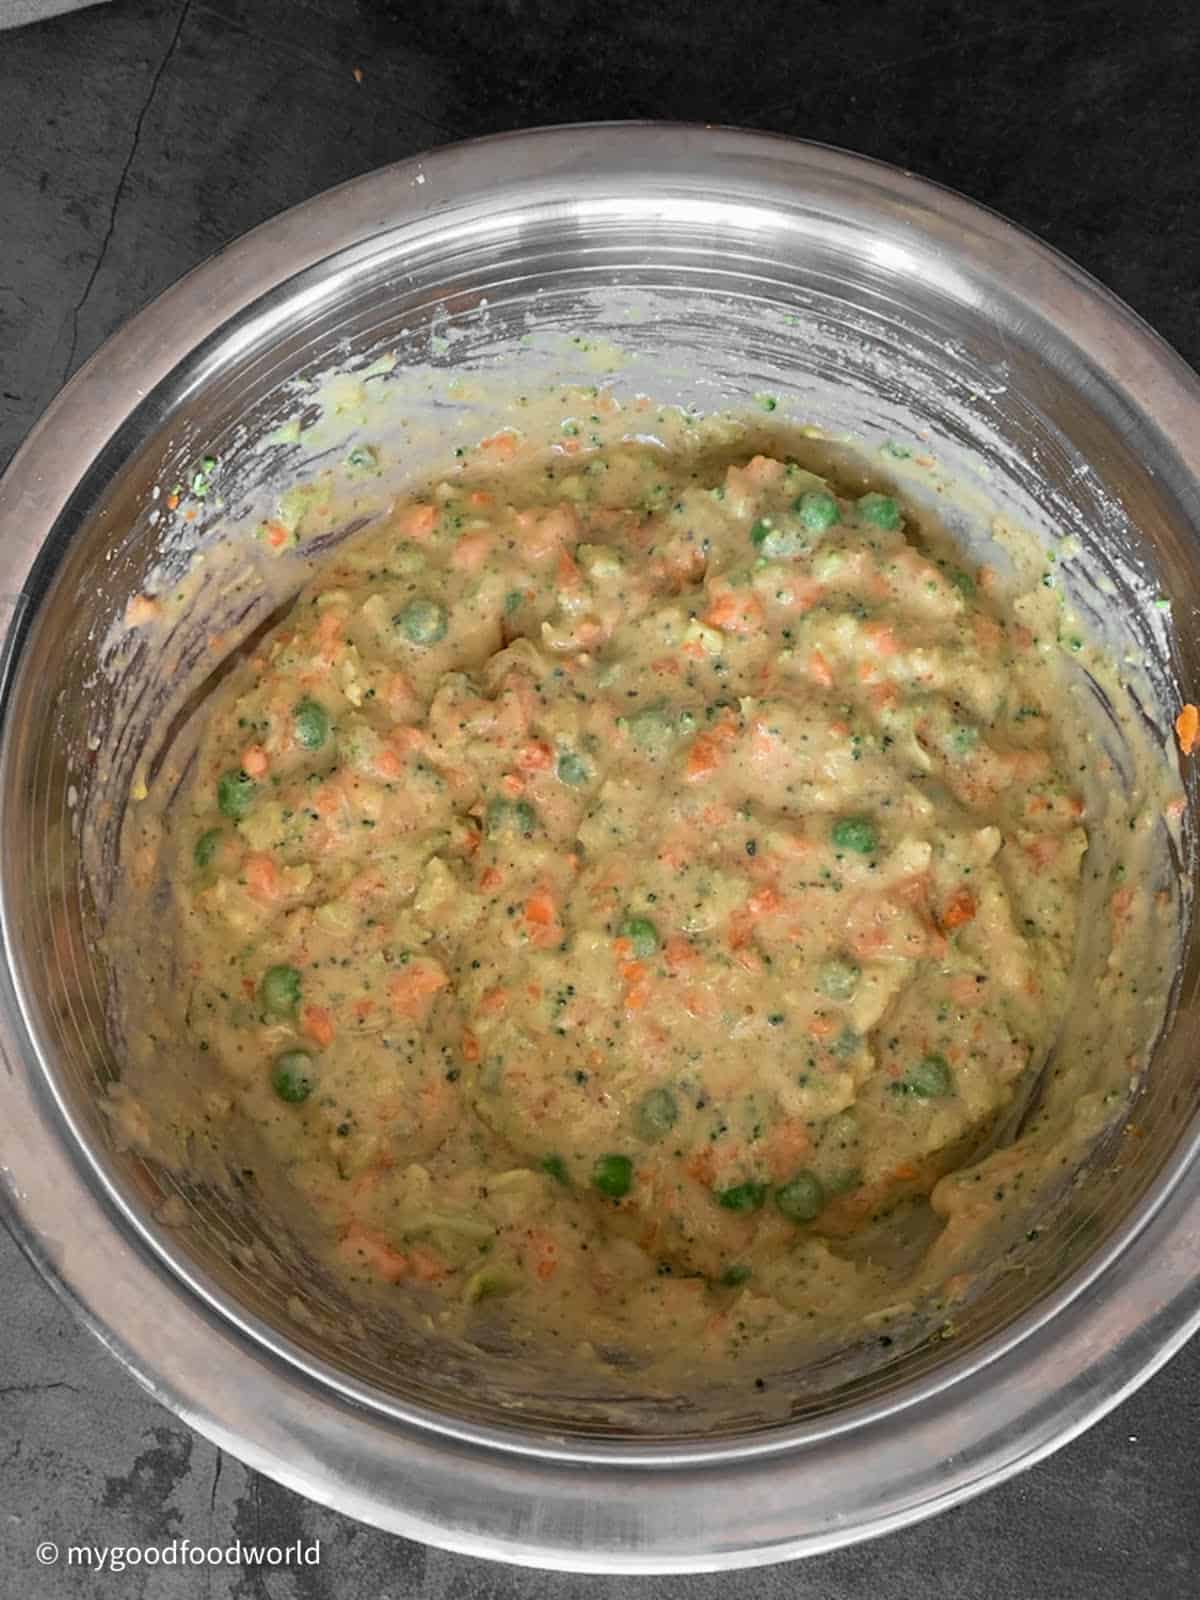 Muffin batter with chopped vegetables and spices has been mixed and kept ready in a steel bowl.